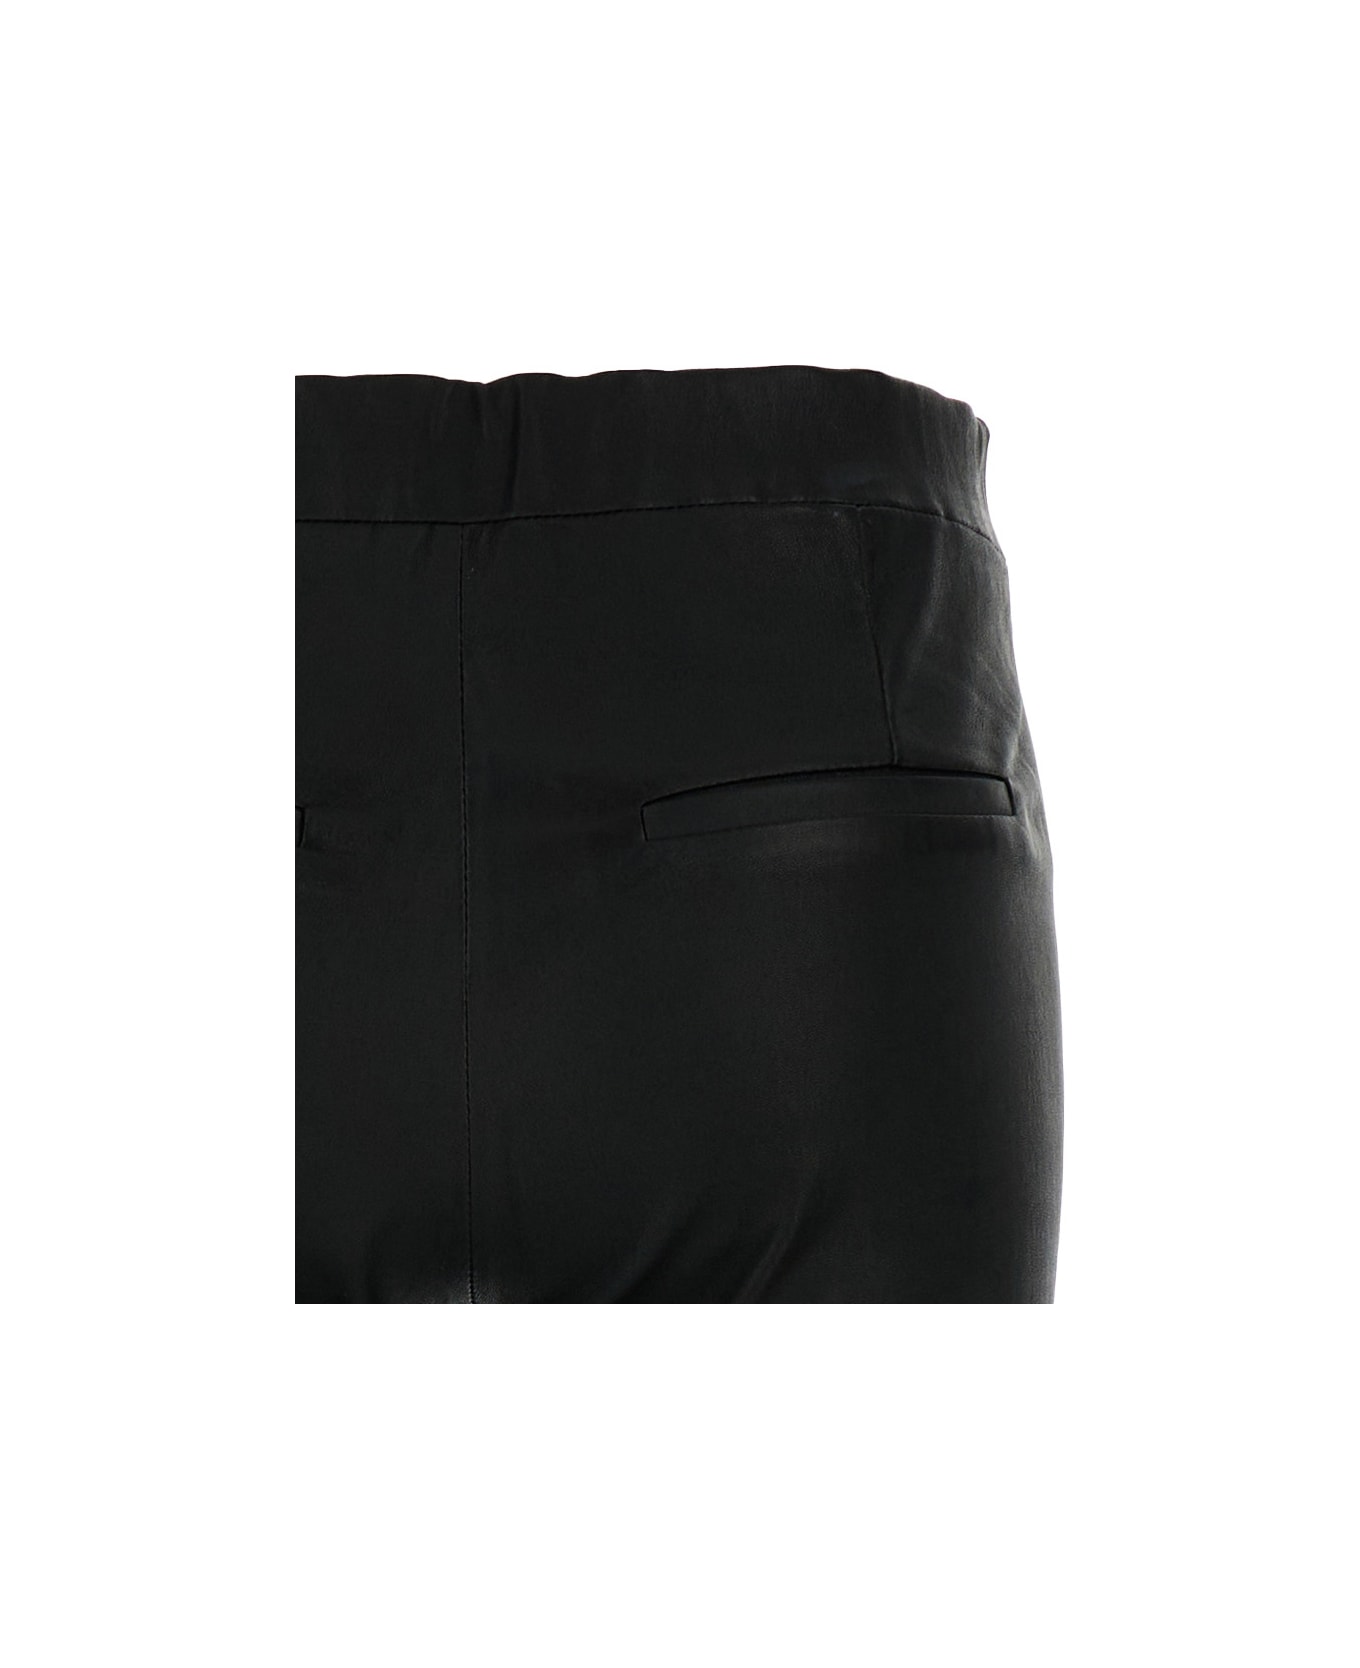 ARMA Black Flared Trousers In Leather Woman - Black